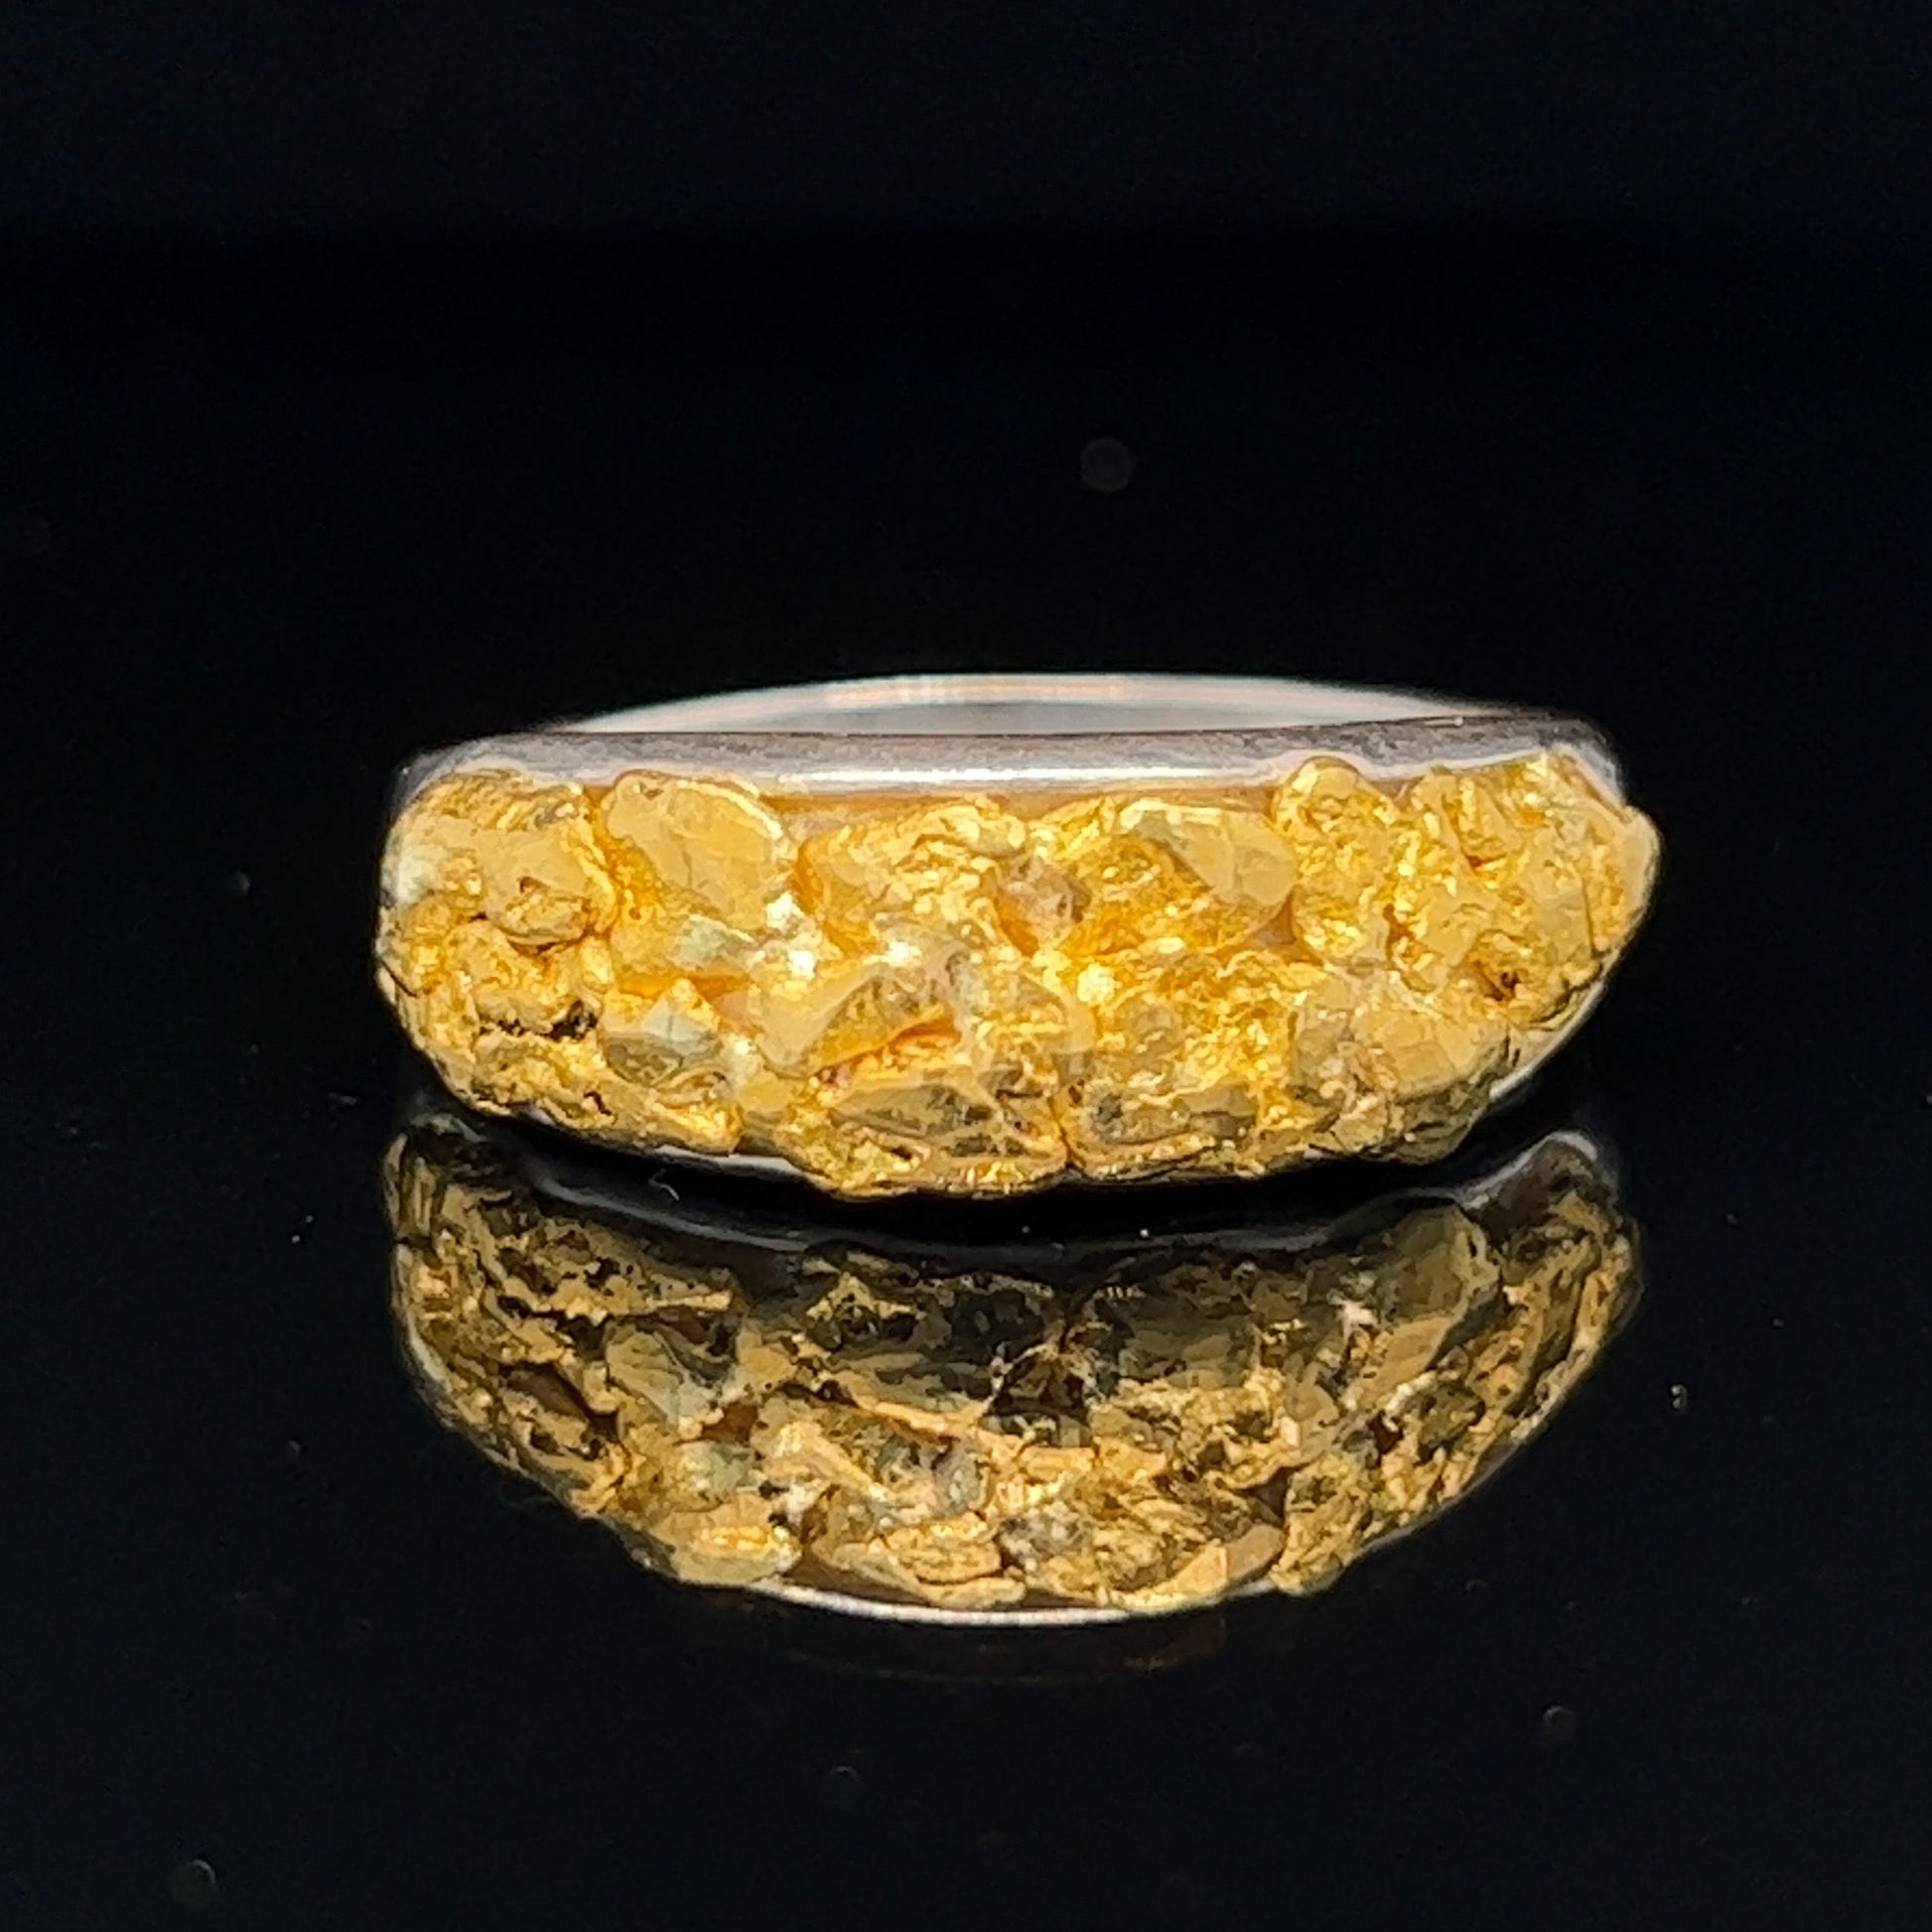 Unique hand made men's ring. Solid silver filled with pure Australian gold nuggets from the Victorian goldfields. 4.2g solid silver and 3.4g pure gold nuggets.